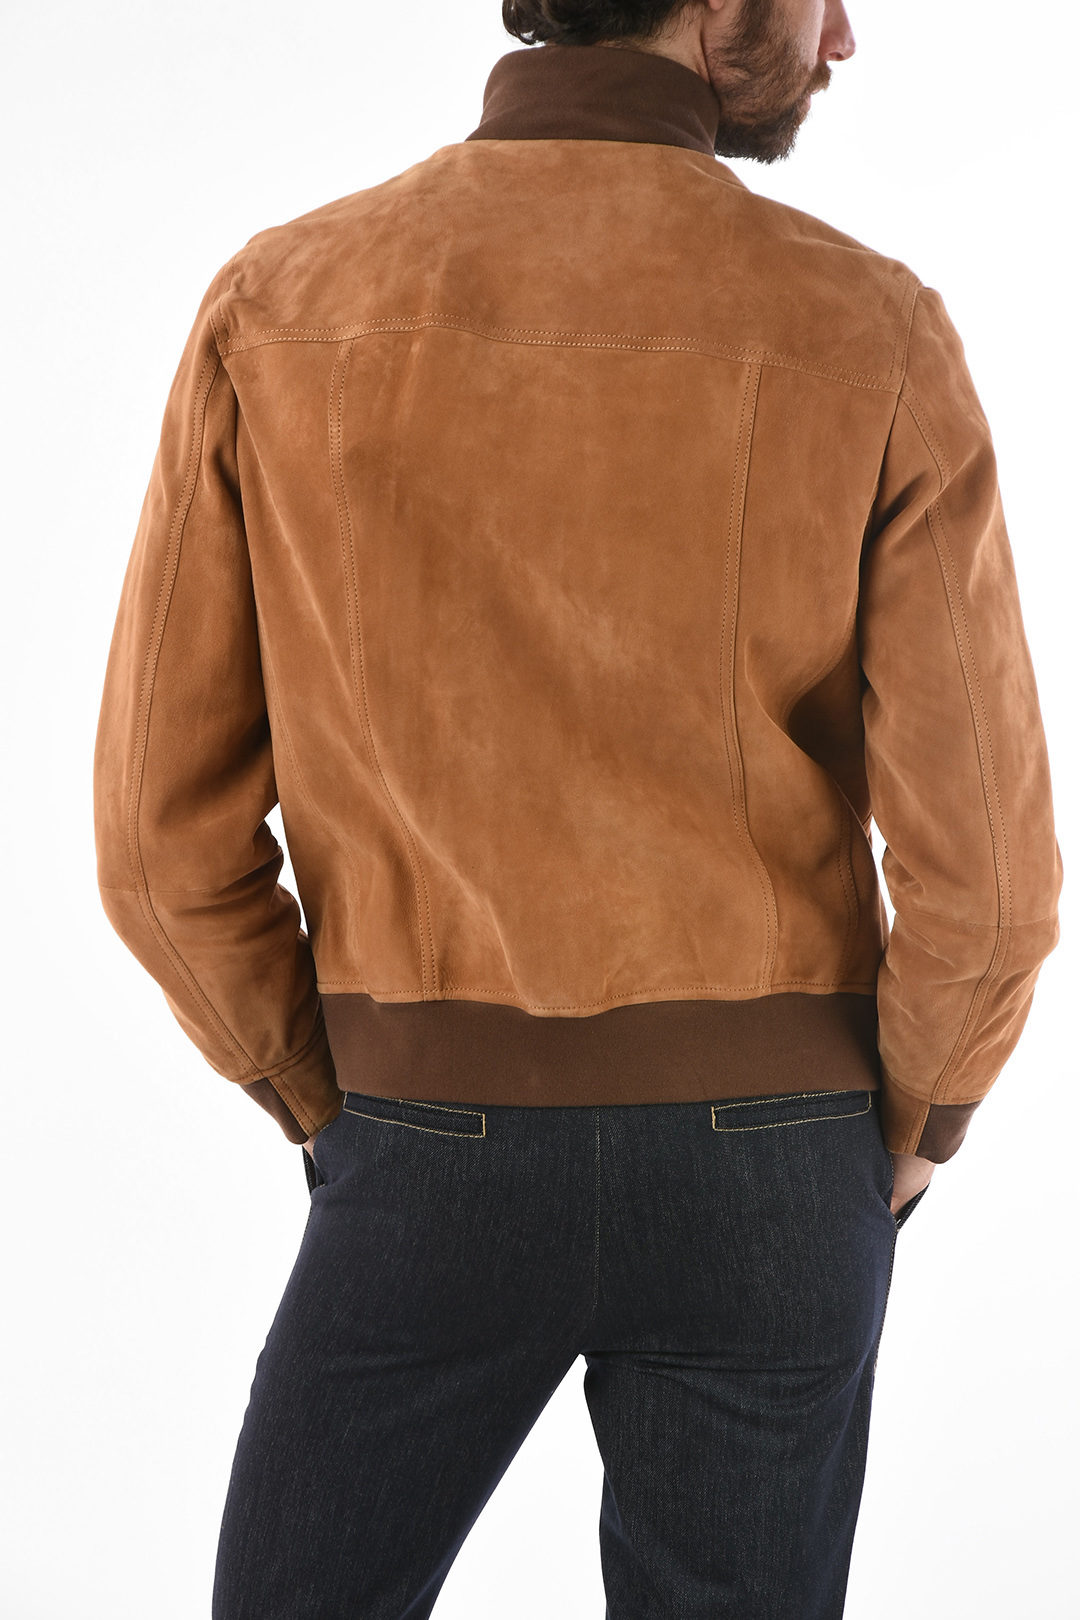 Brunello Cucinelli Suede Jacket with Patch Pockets men - Glamood Outlet